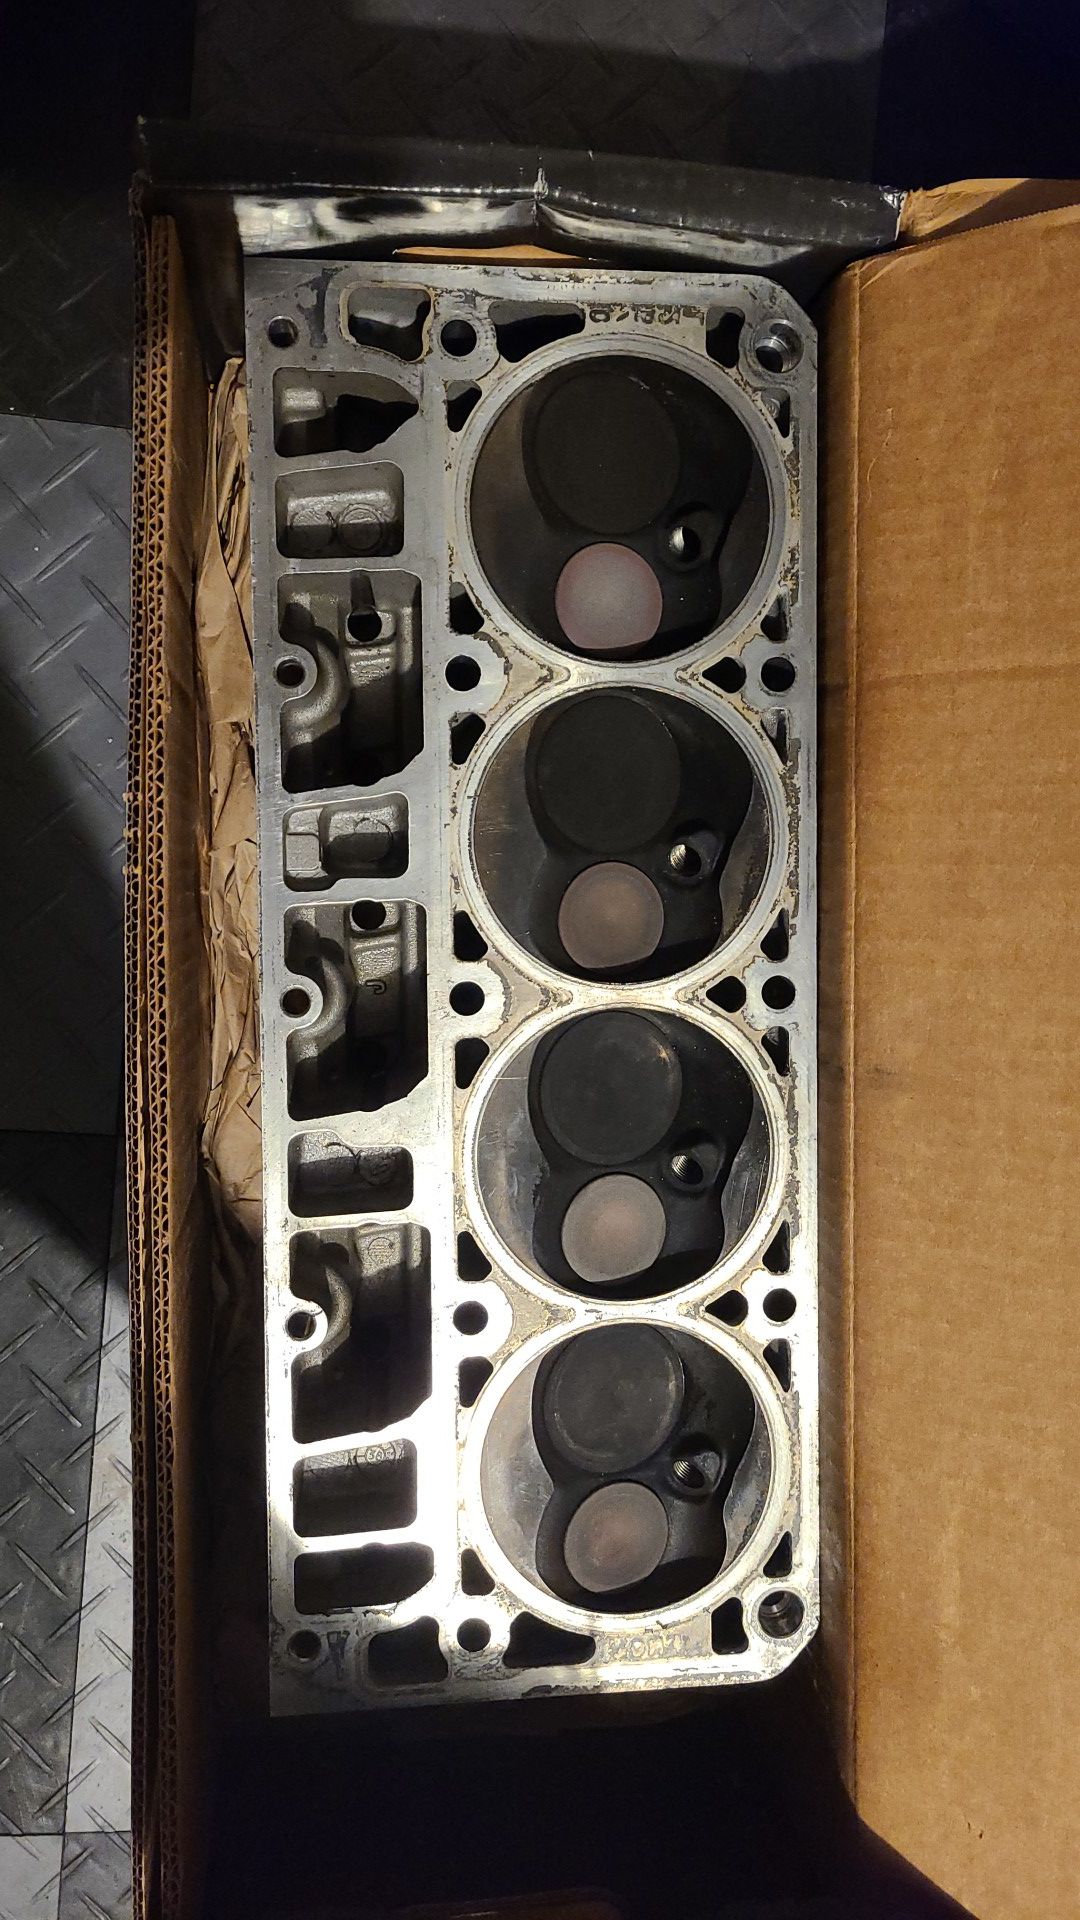 Chevy LS3 HEADS 0821. never machined. Factory deck height pulled off at 42k miles no damage